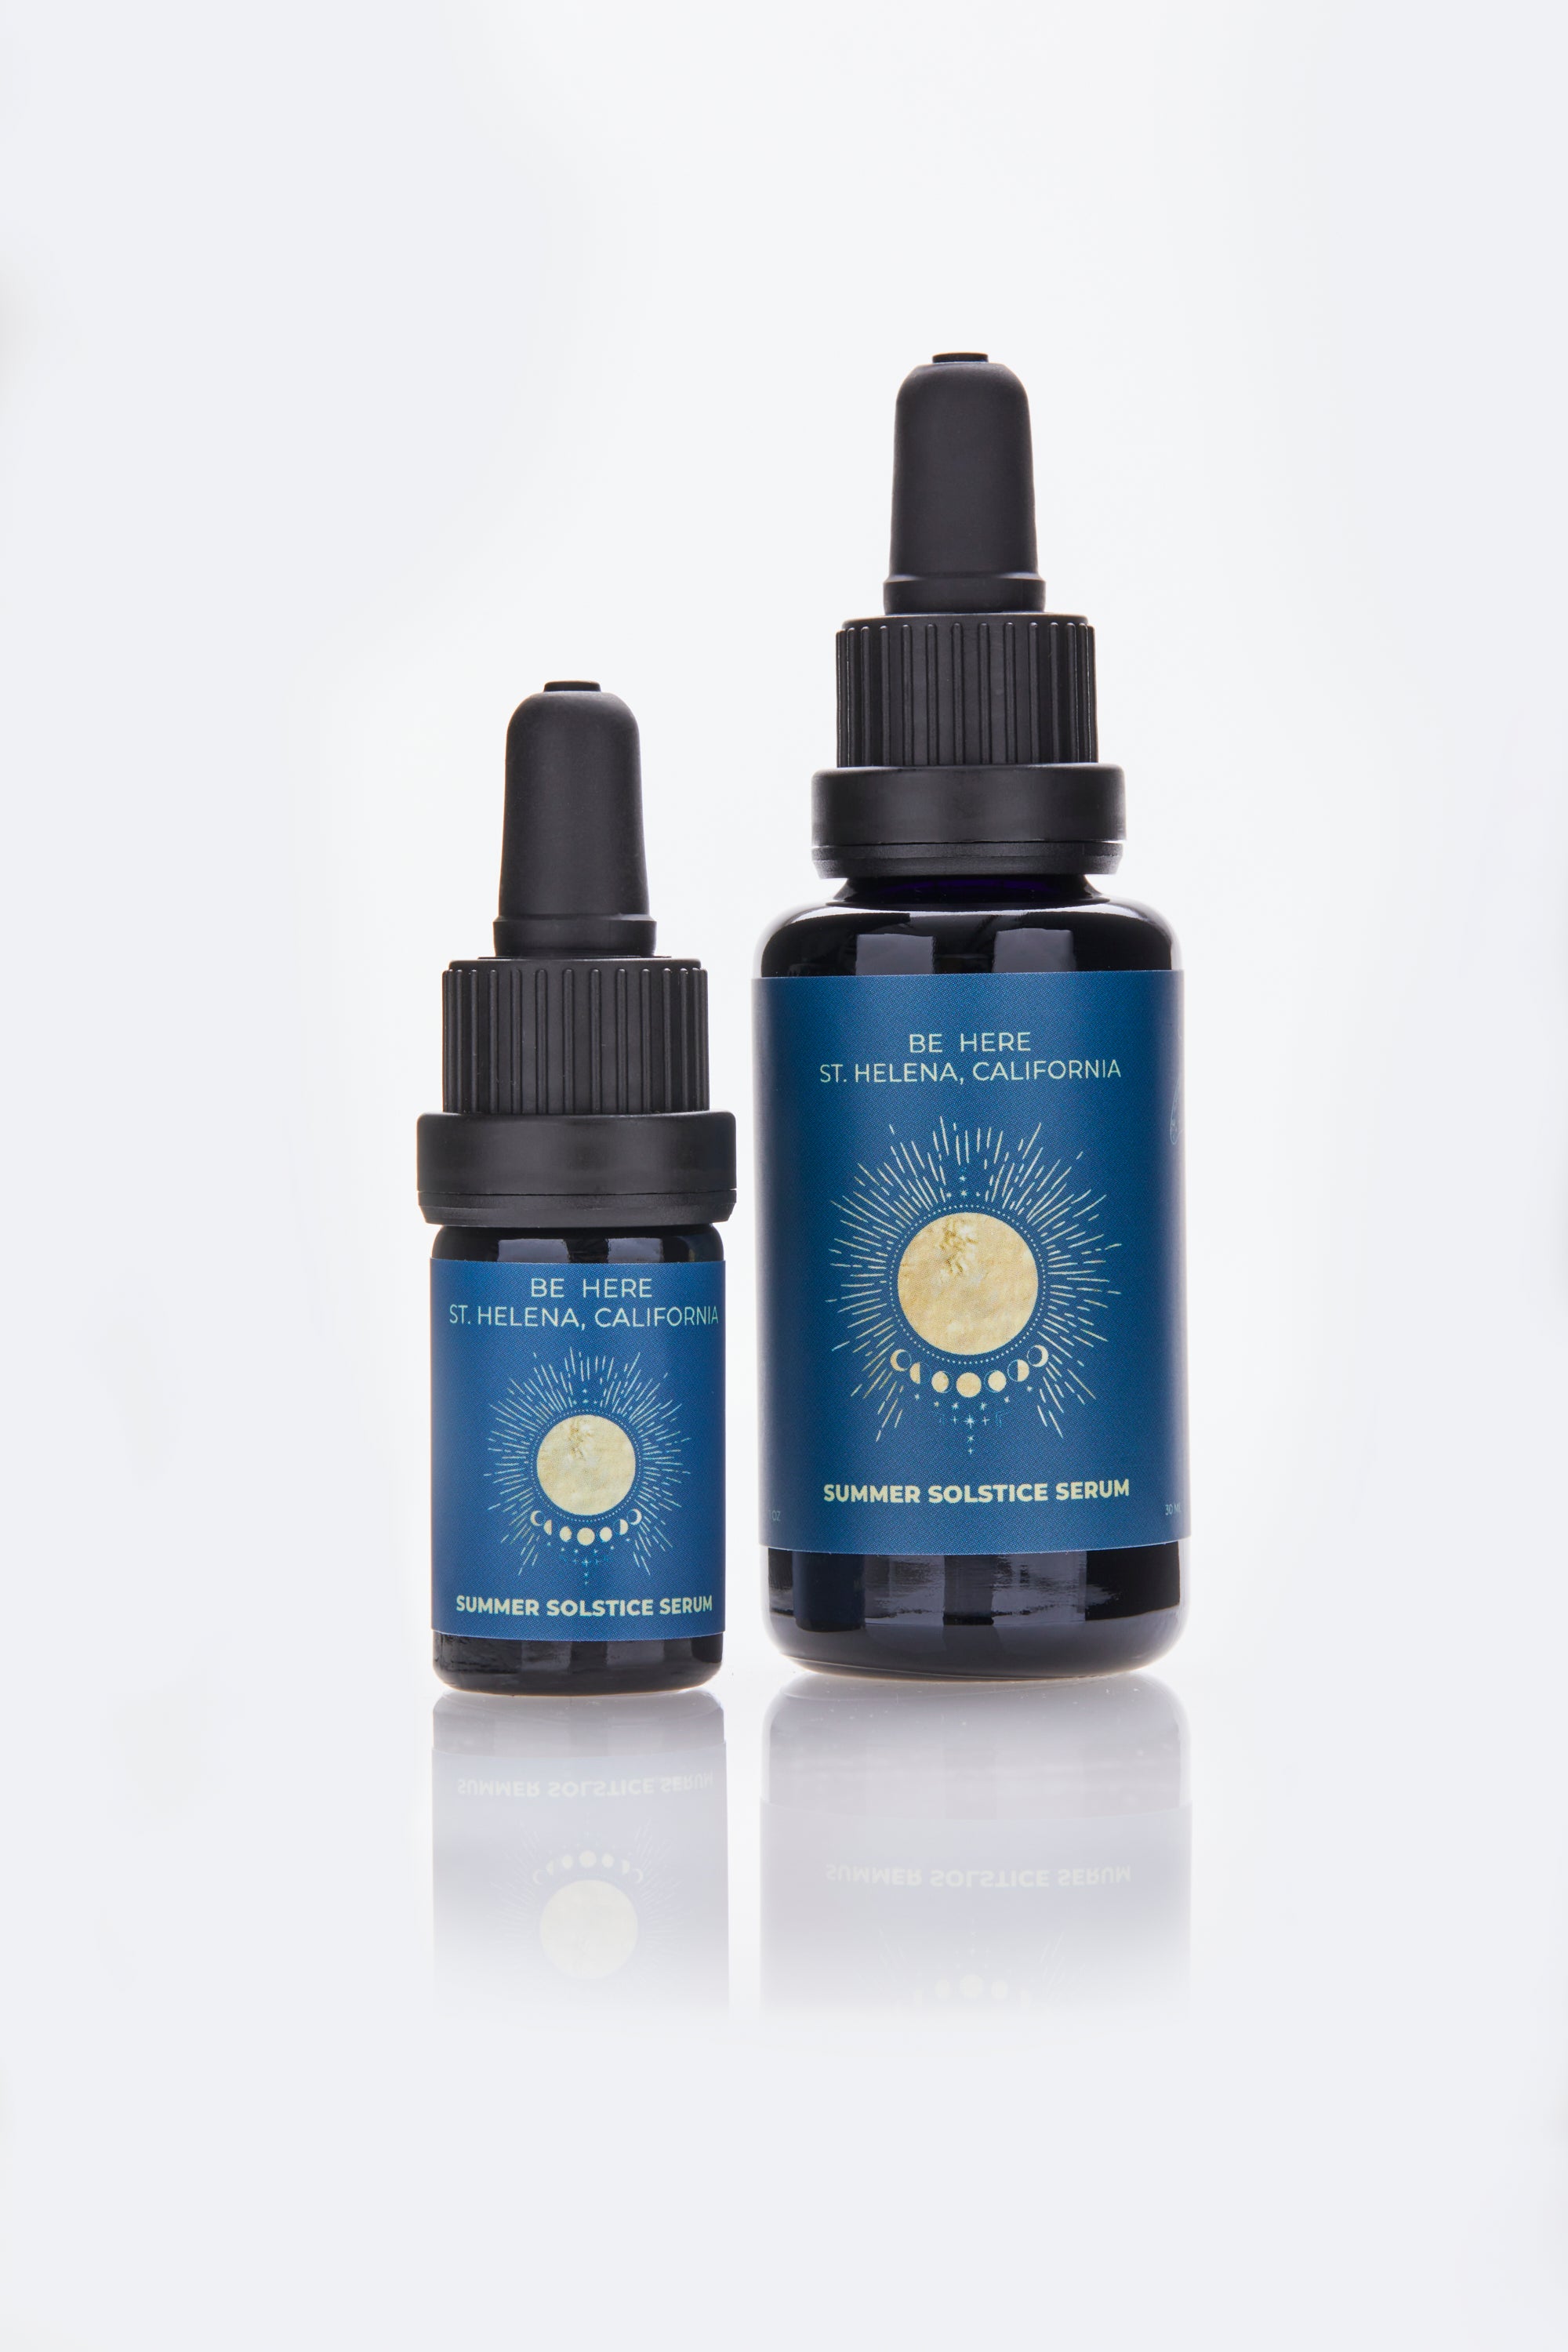 Be Here Farm + Nature Summer Solstice Serum (Wildcrafted ~ 100% Certified Biodynamic) is